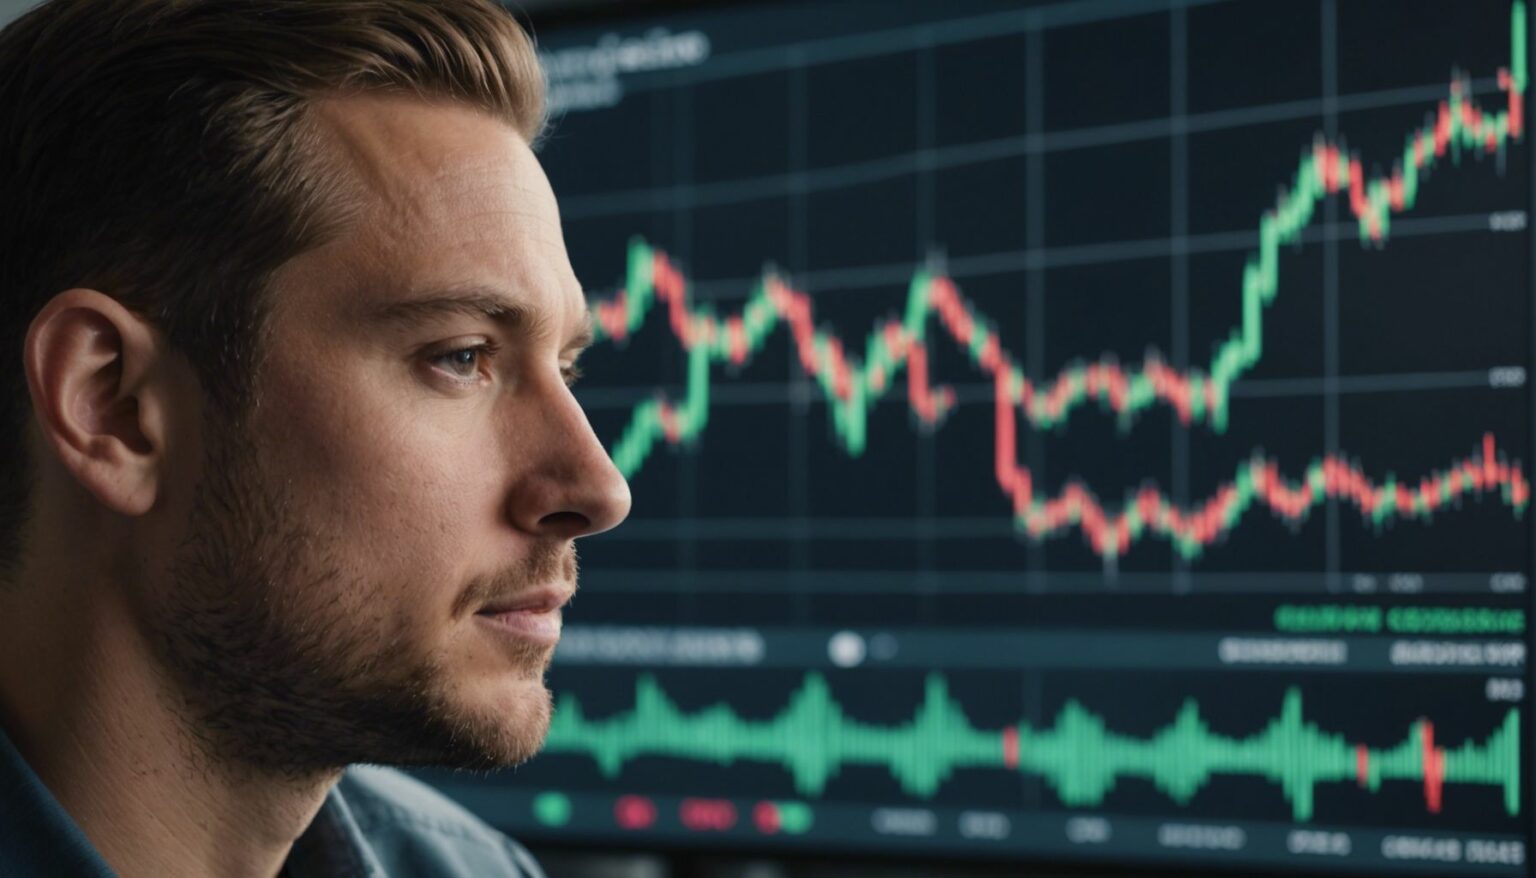 Headshots of top cryptocurrency traders with digital currency symbols and upward-trending graphs in the background.